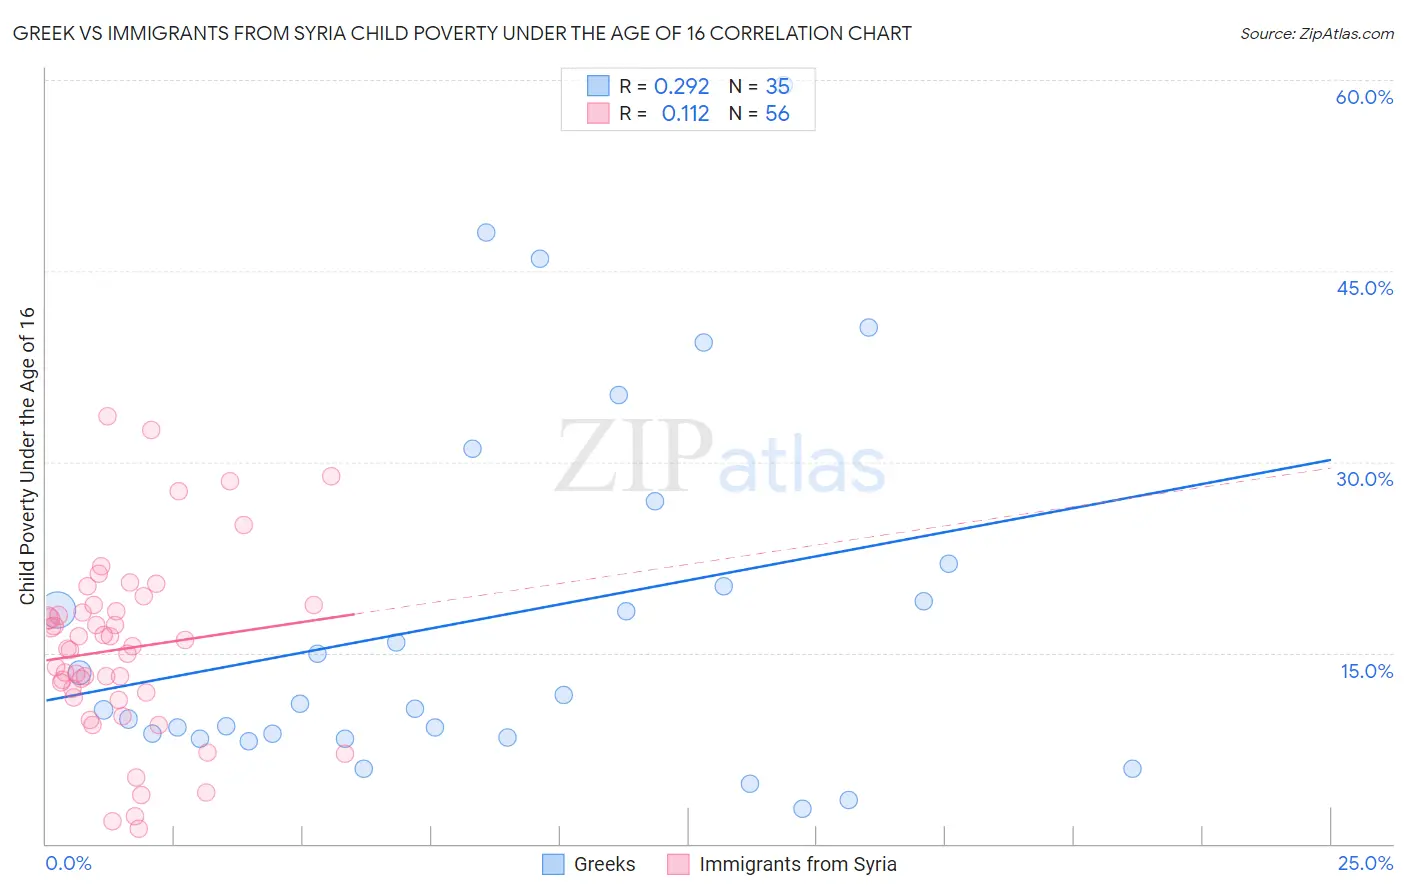 Greek vs Immigrants from Syria Child Poverty Under the Age of 16